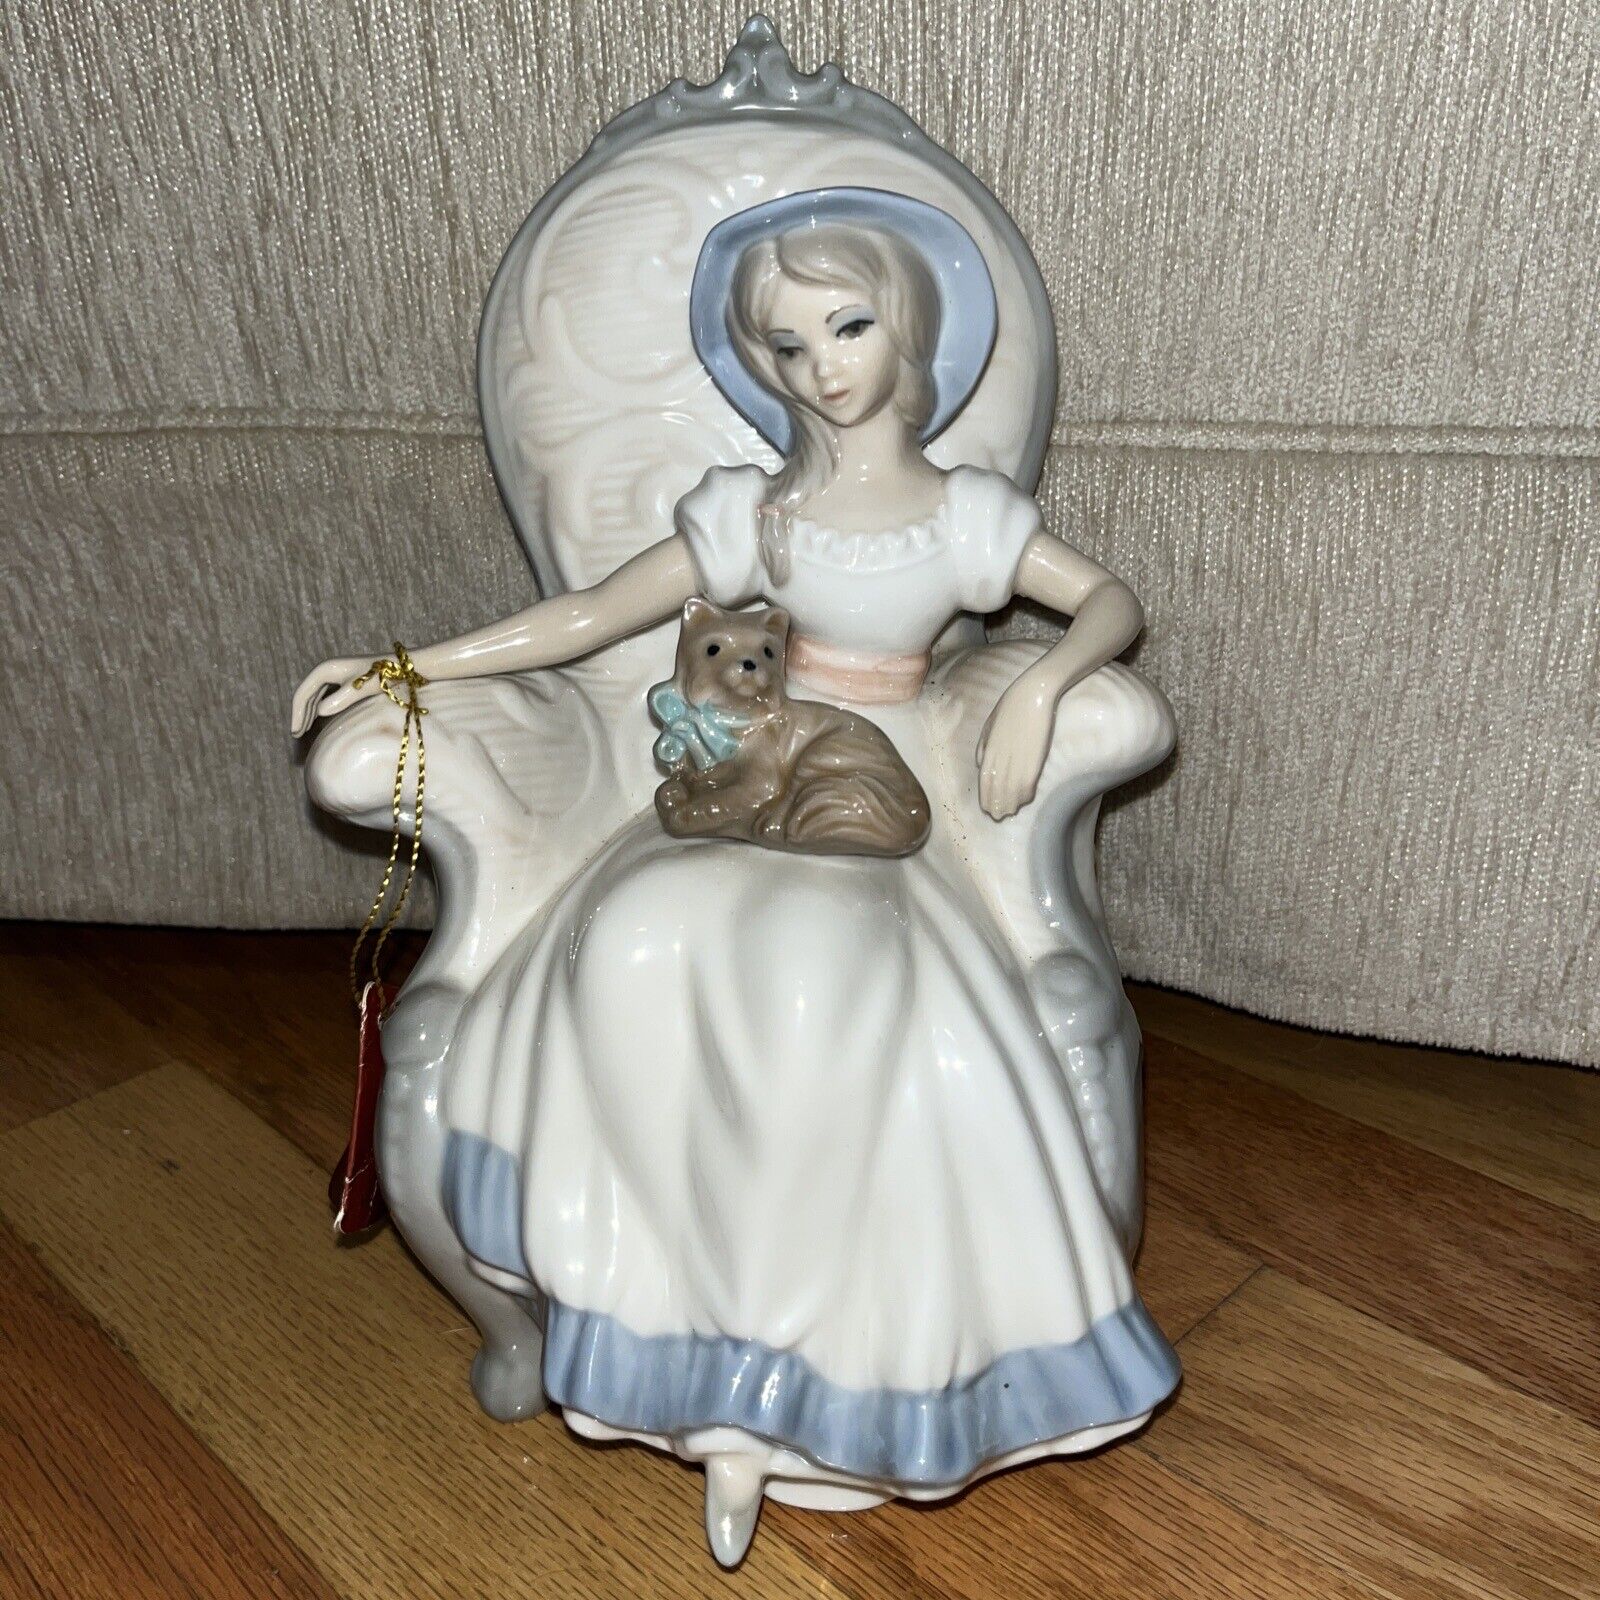 Vintage Tengra Figurine, Lady In Chair With Dog On Her Lap, Porcelain (Spain)